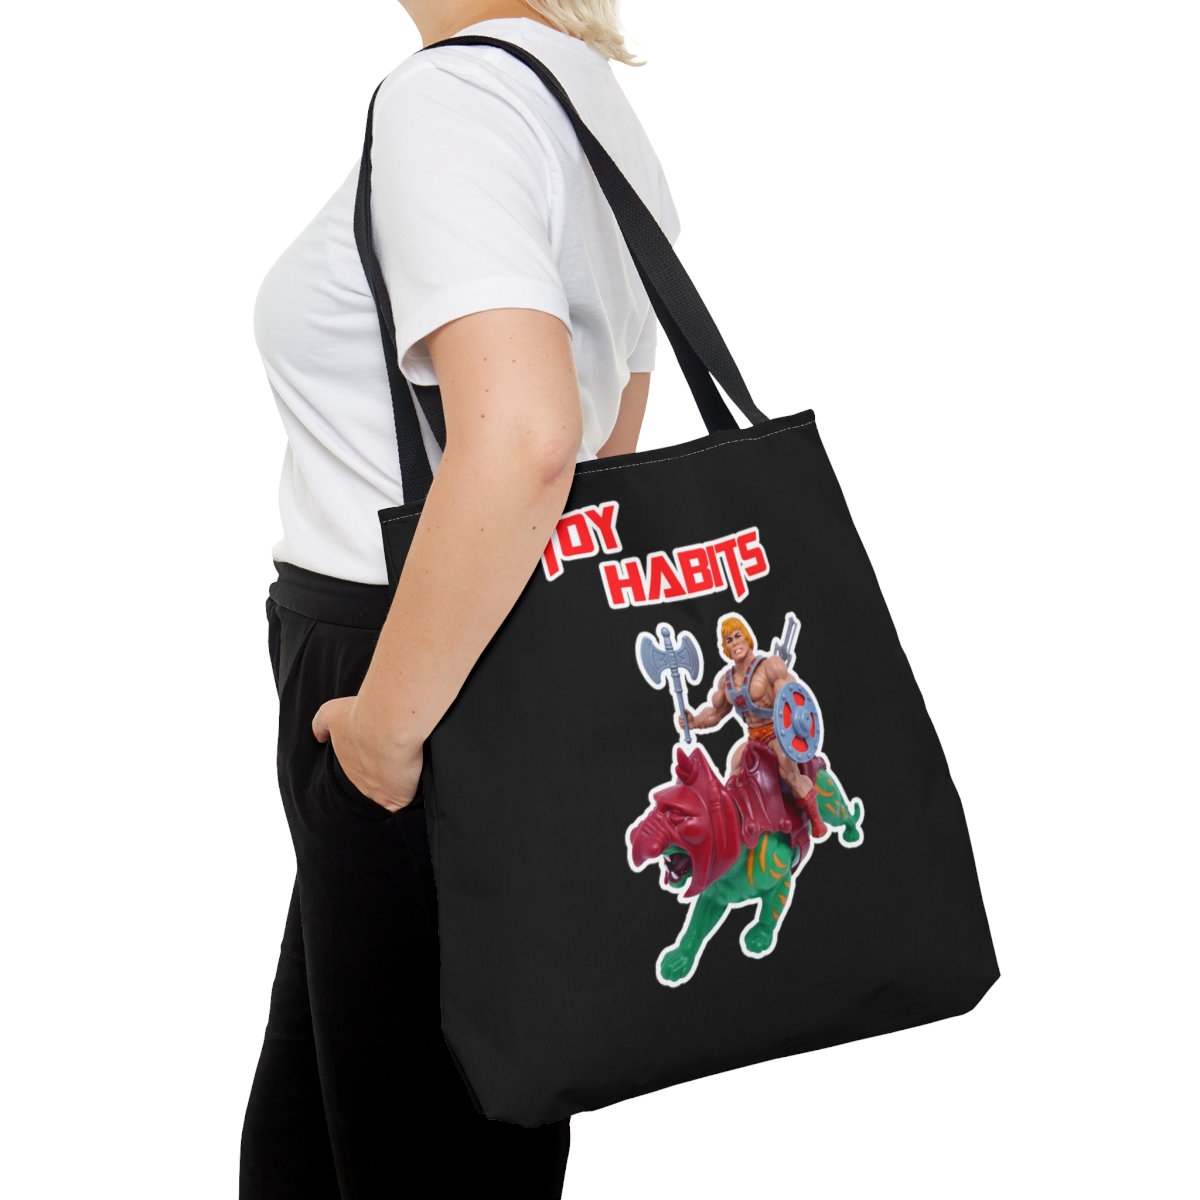 He-Man and Battle Cat Tote Bag product thumbnail image